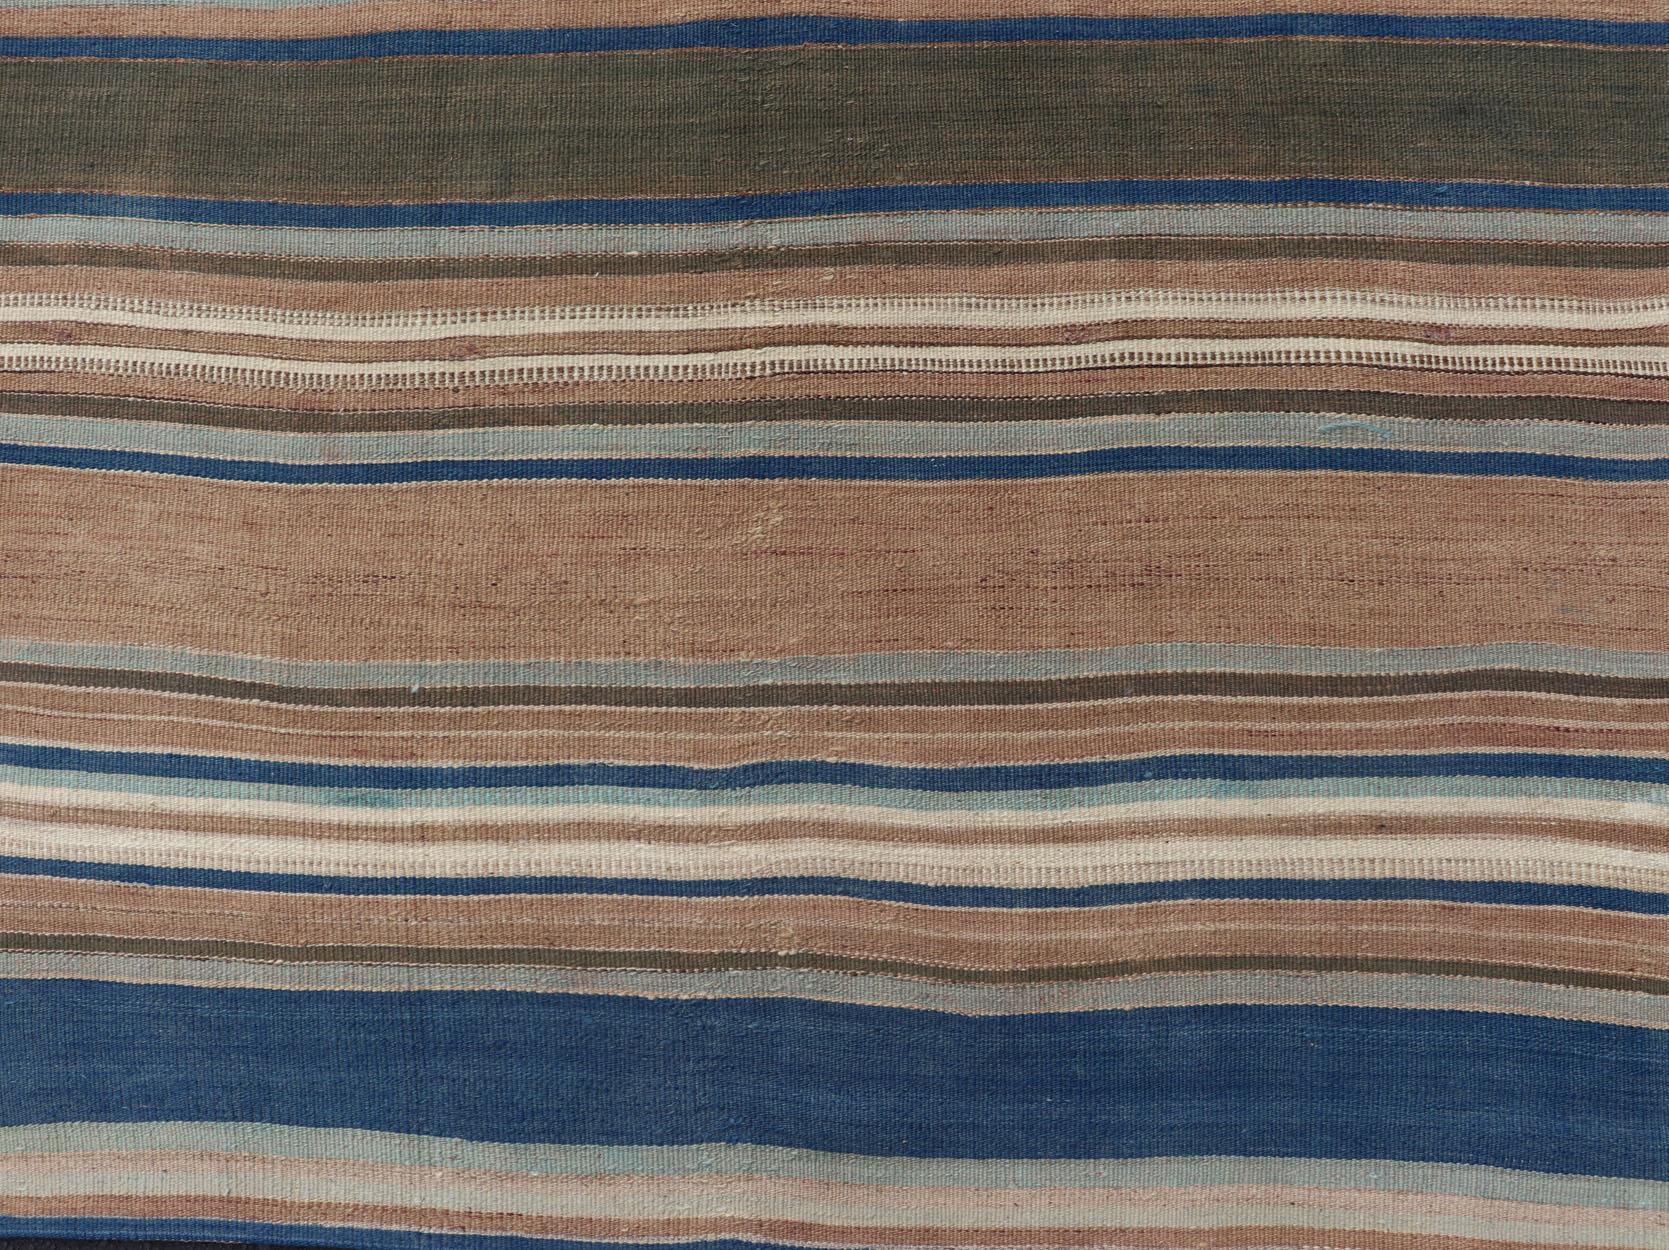 Vintage Turkish flat-weave Kilim with blue's, brown, & taupe in striped design. Keivan Woven Arts / rug EN-P13682, country of origin / type: Turkey / Kilim, circa Mid-20th Century.

This Turkish Kilim flat-woven is perfectly suited for a variety